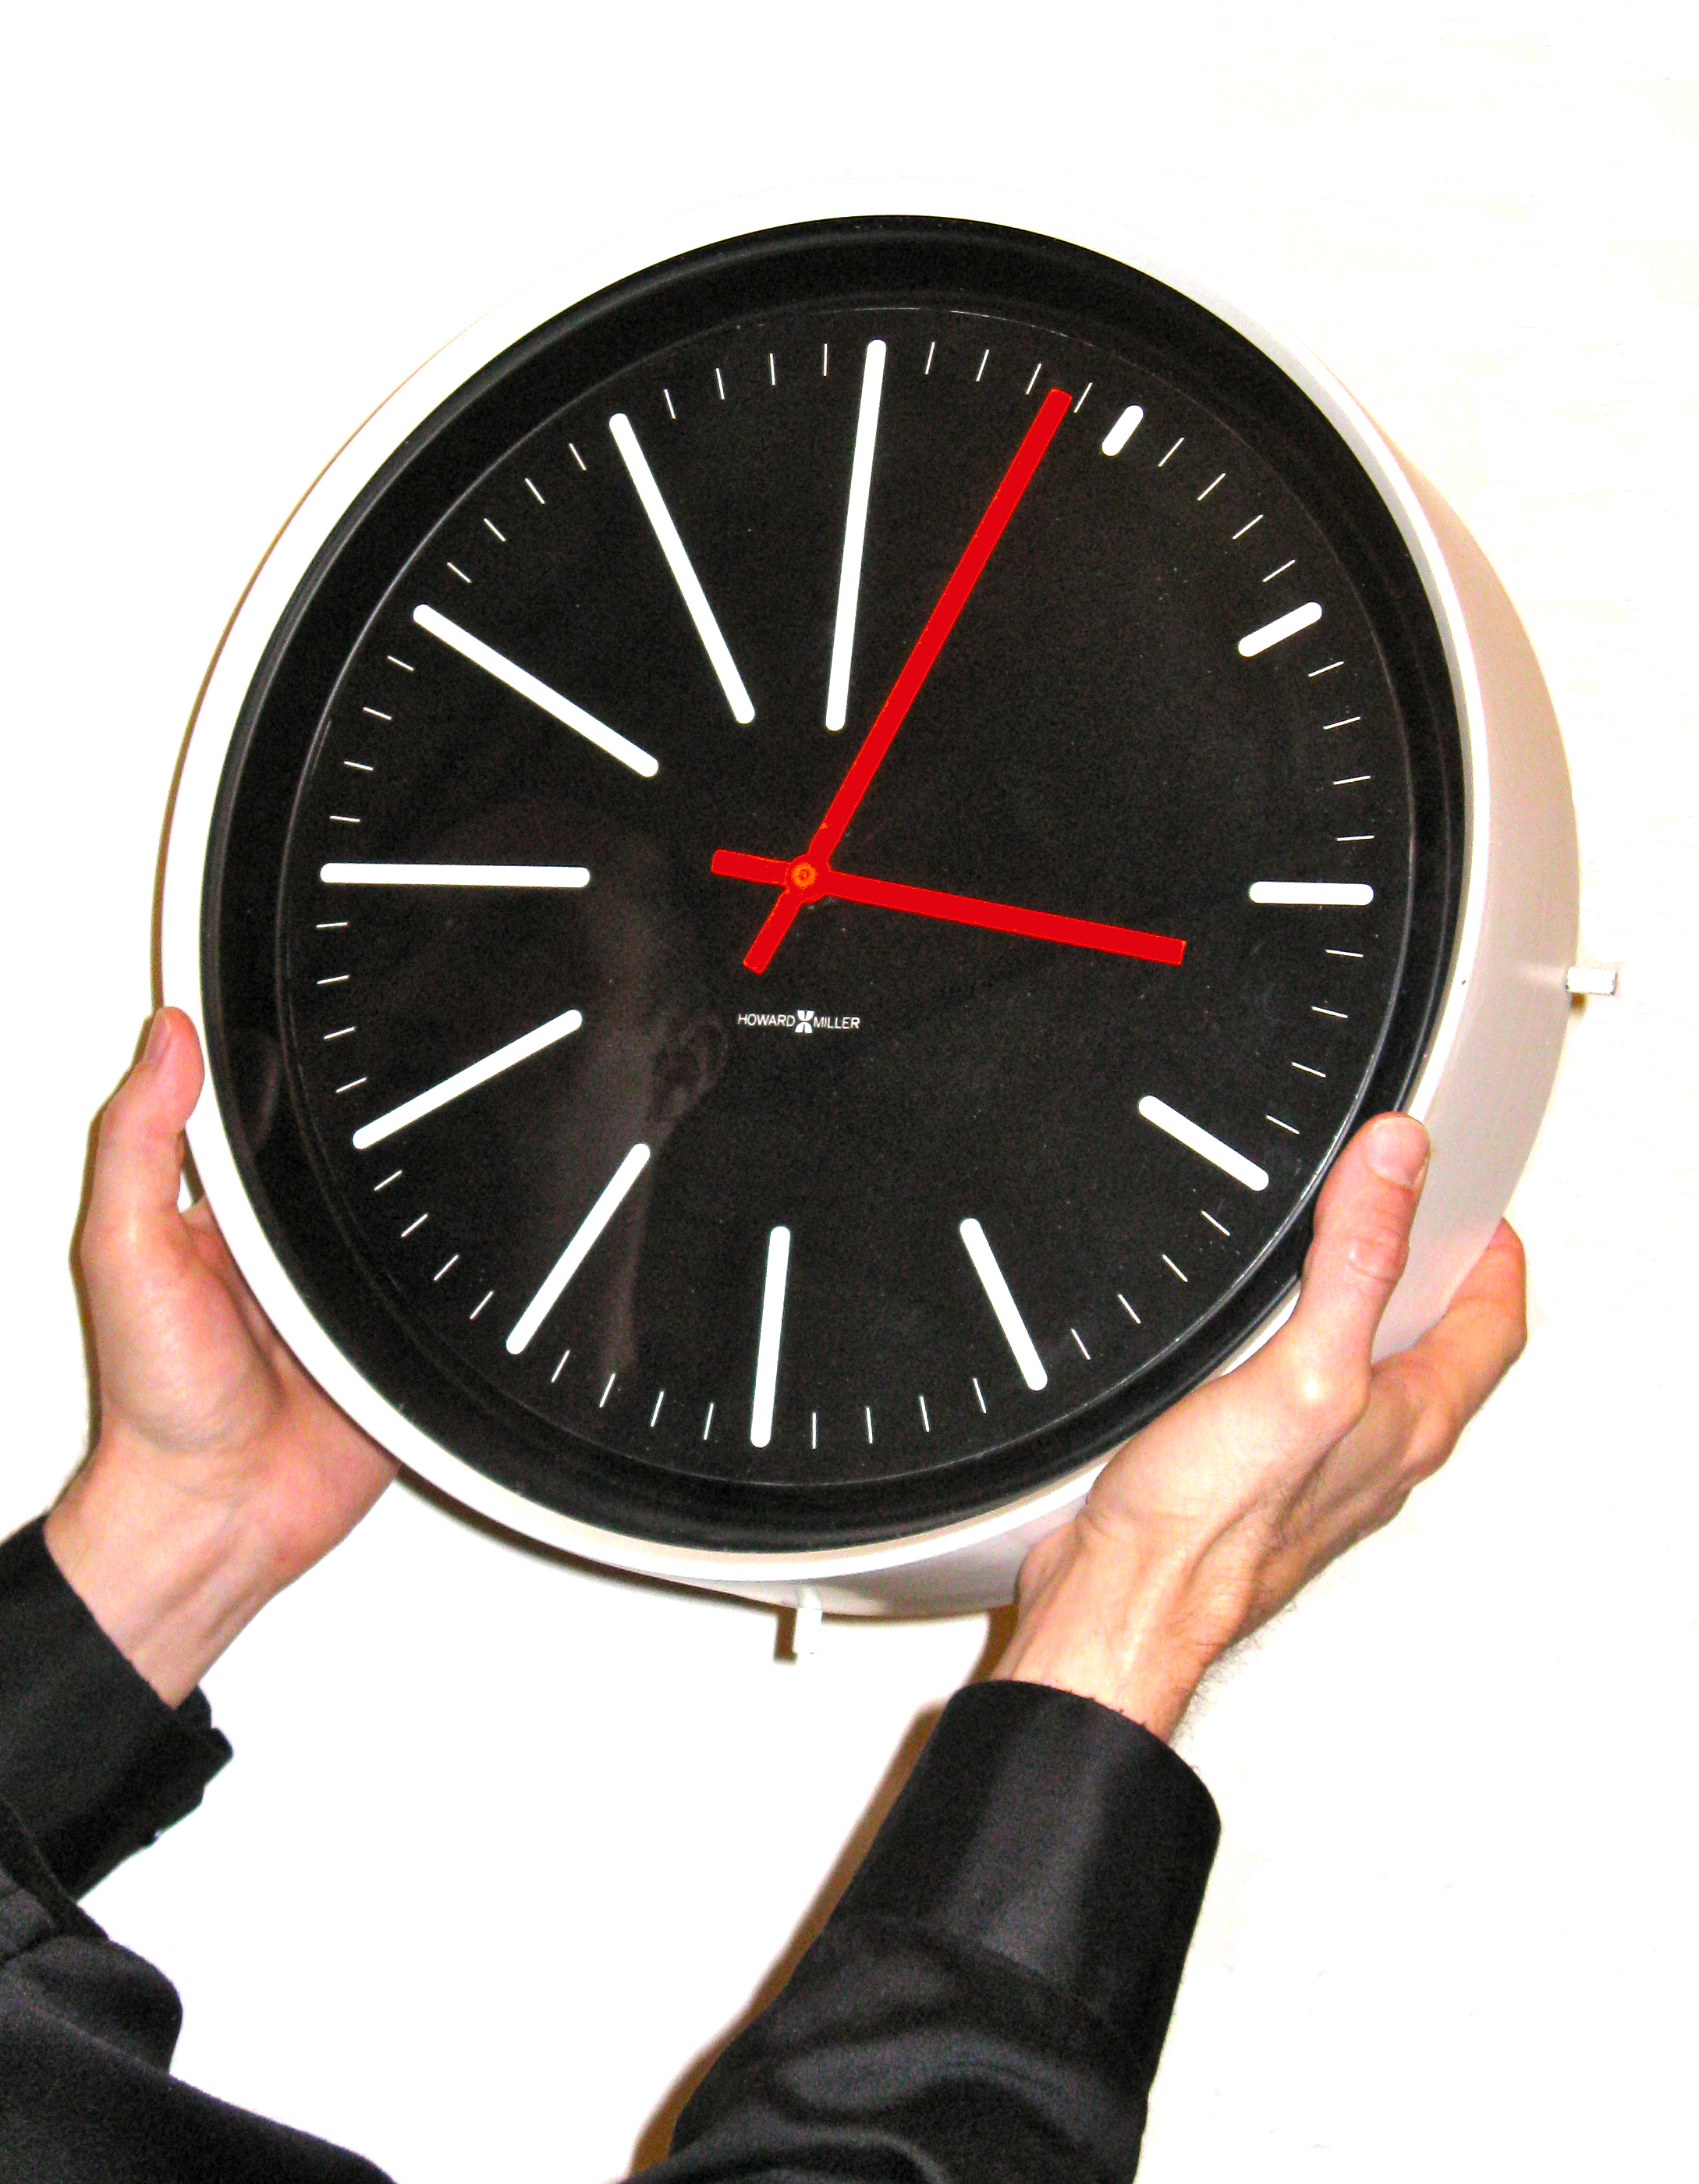 Picture showing a man holding a clock to show scale